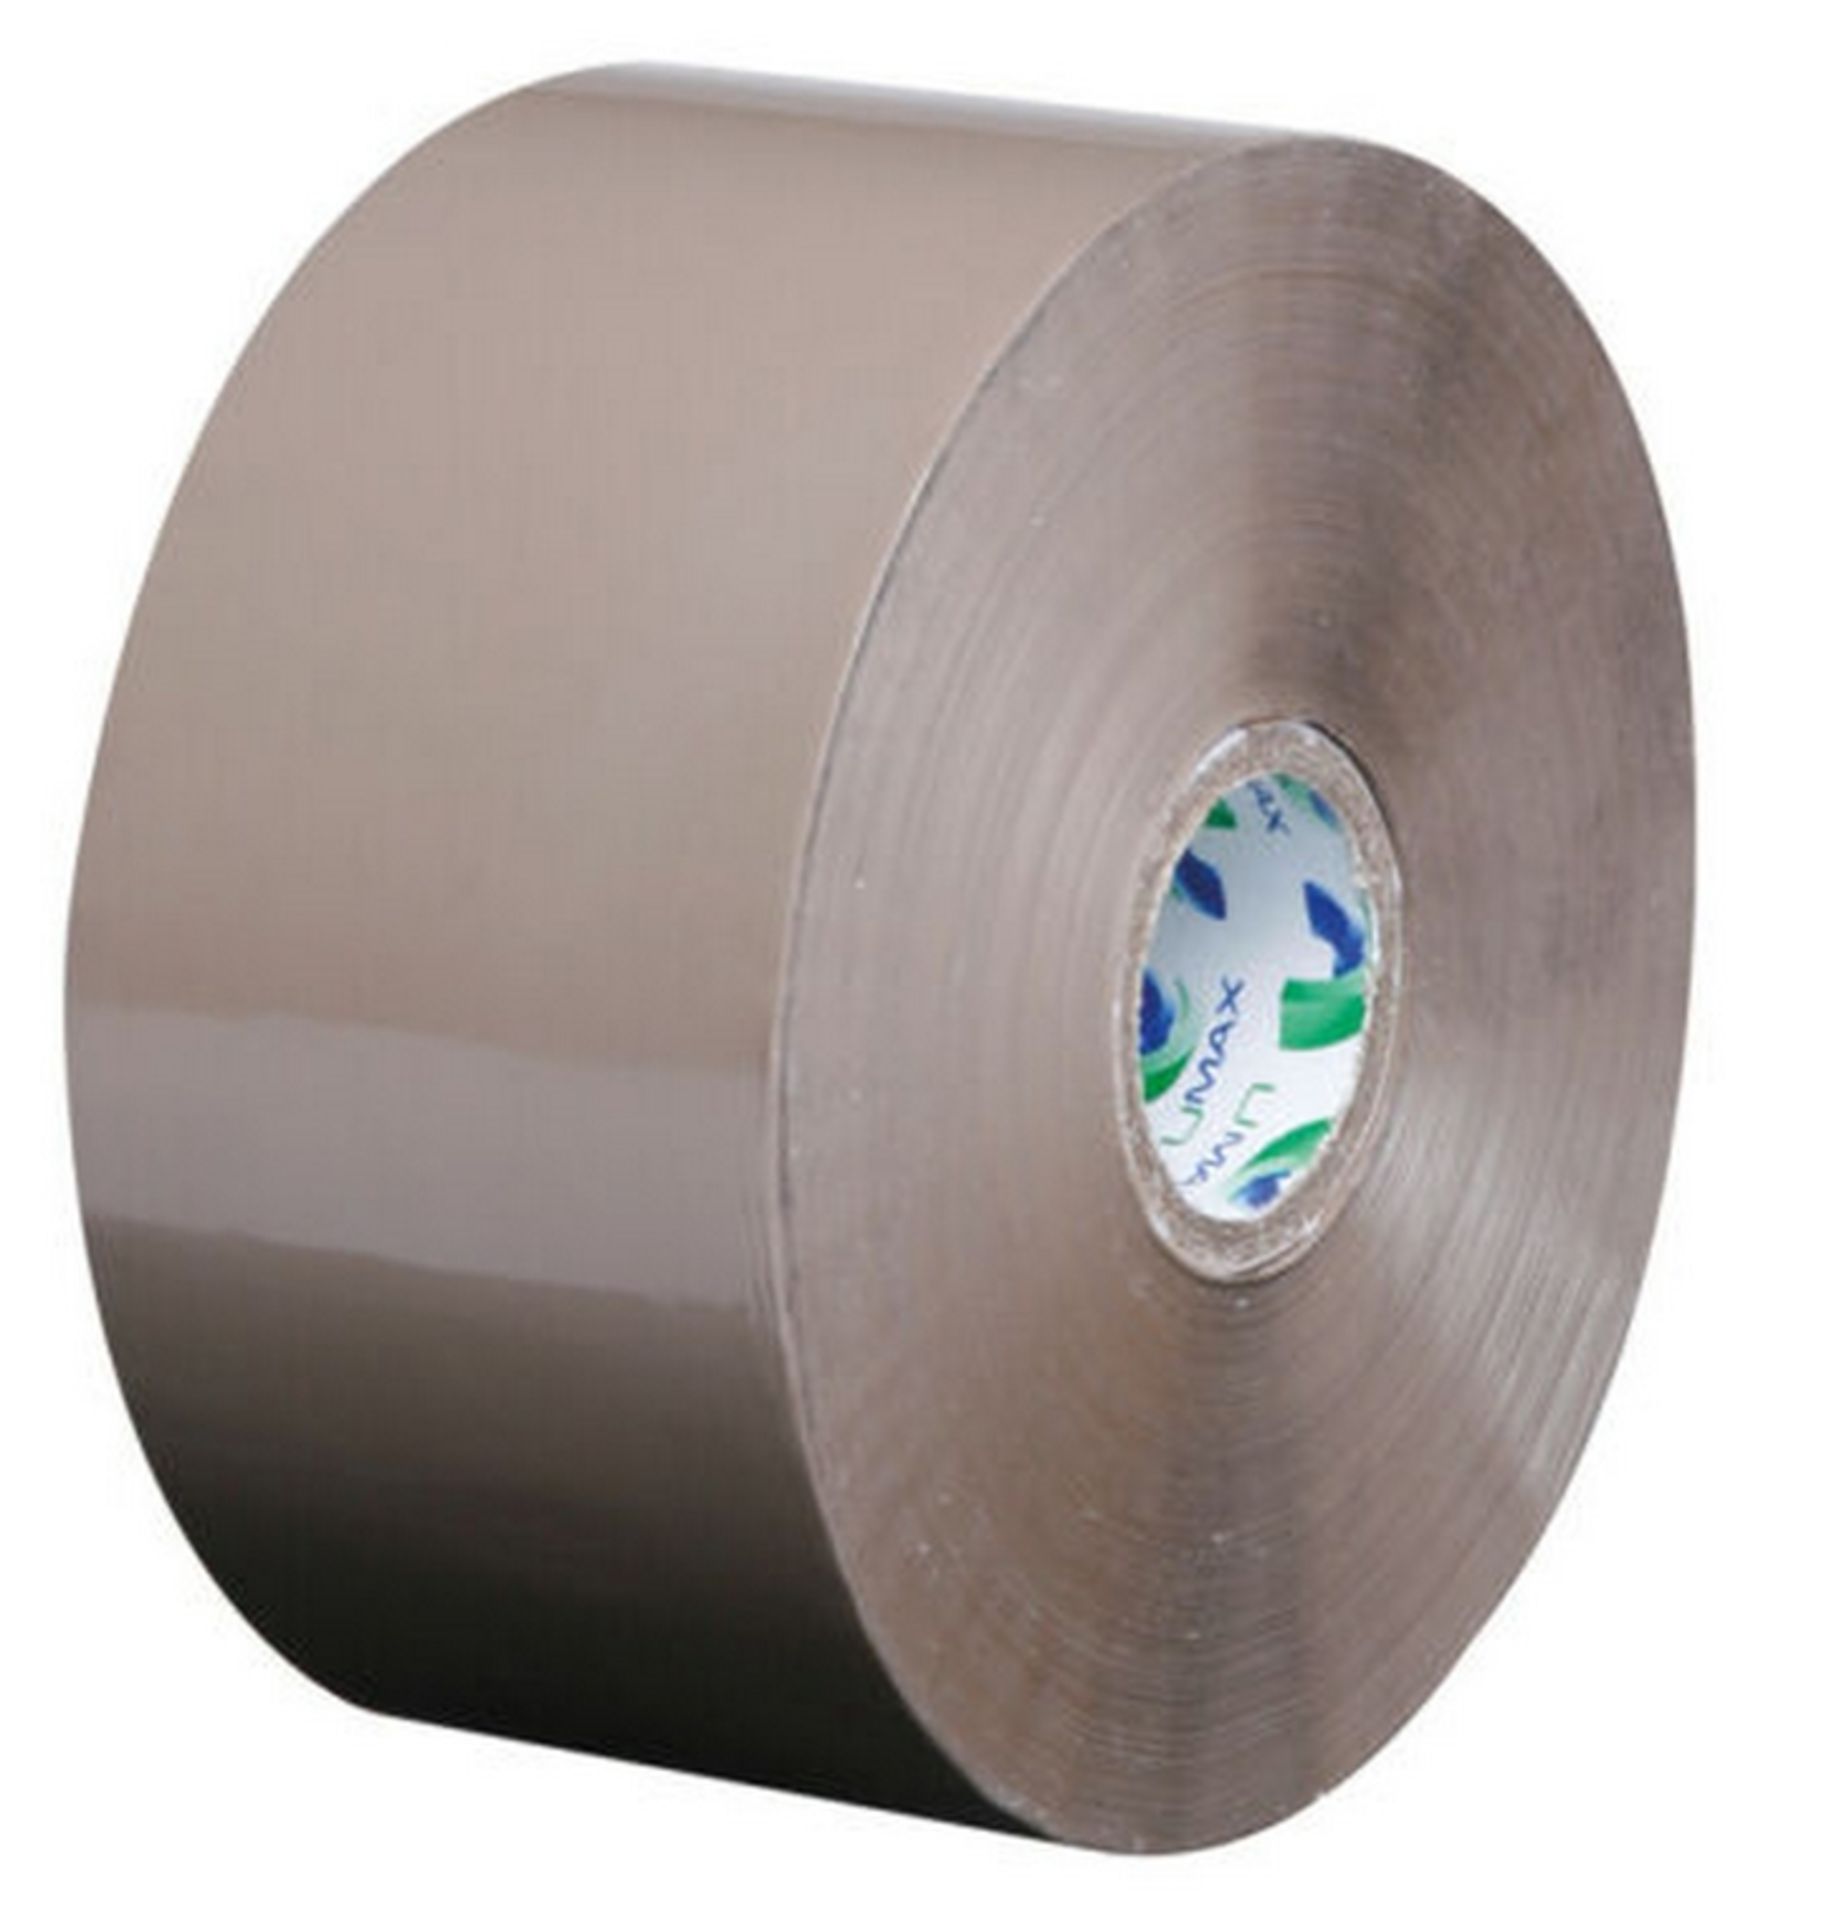 24 Rolls Of Top Quality Buff Parcel Tape 48Mm Wide And 150 Meters Long